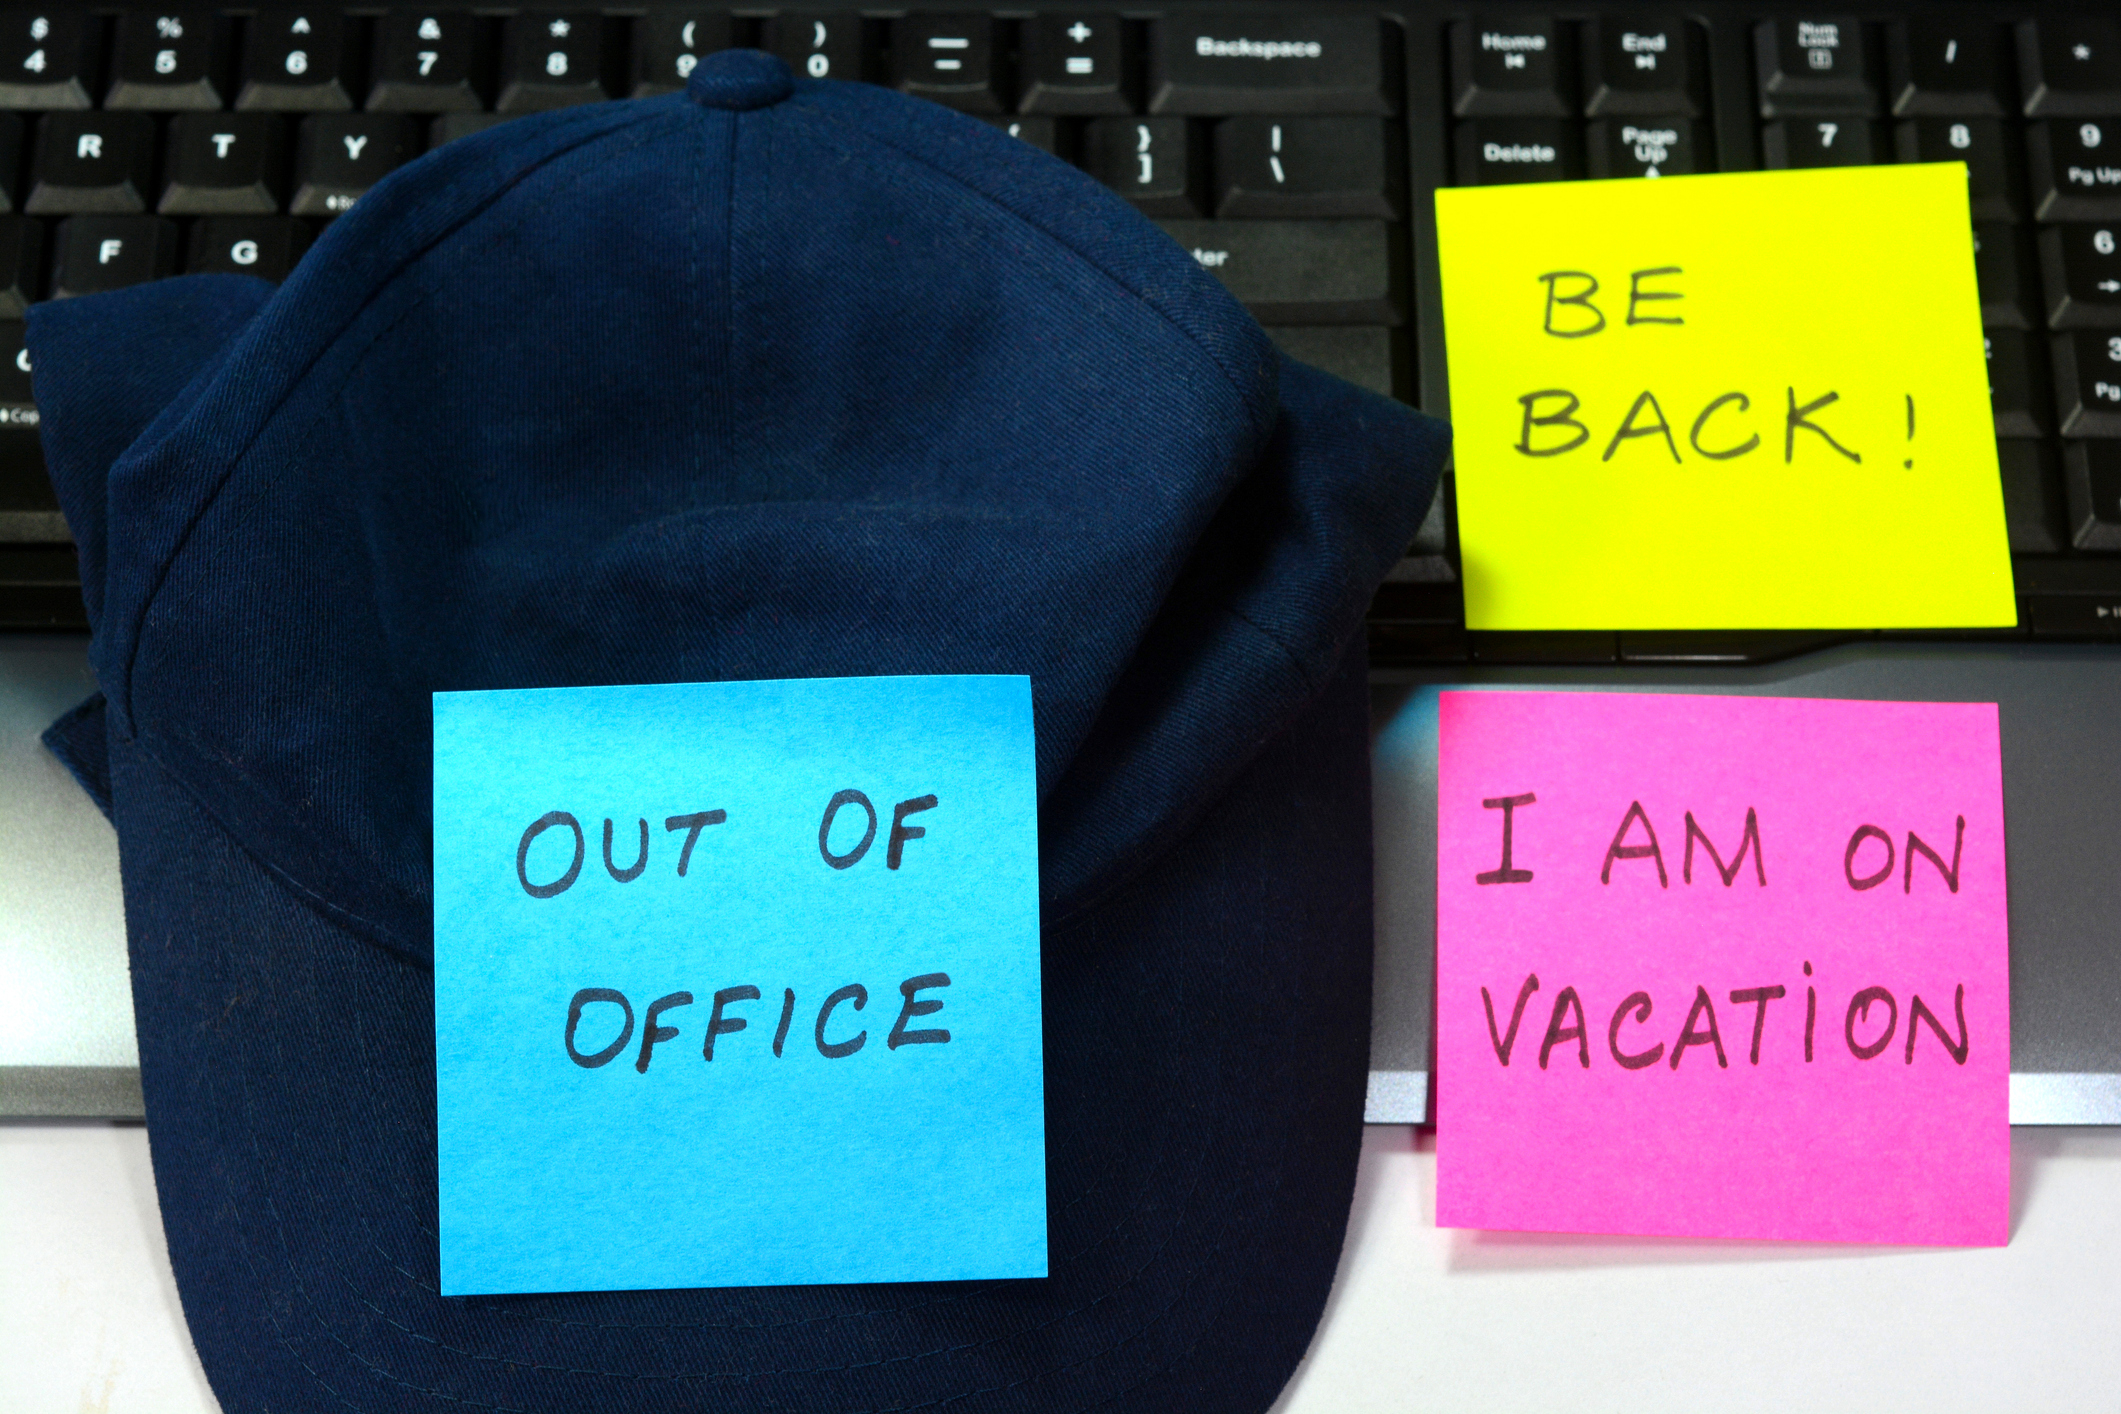 A cap with sticky notes saying &quot;OUT OF OFFICE&quot;, &quot;BE BACK!&quot; and &quot;I AM ON VACATION&quot; as a humorous out-of-office message